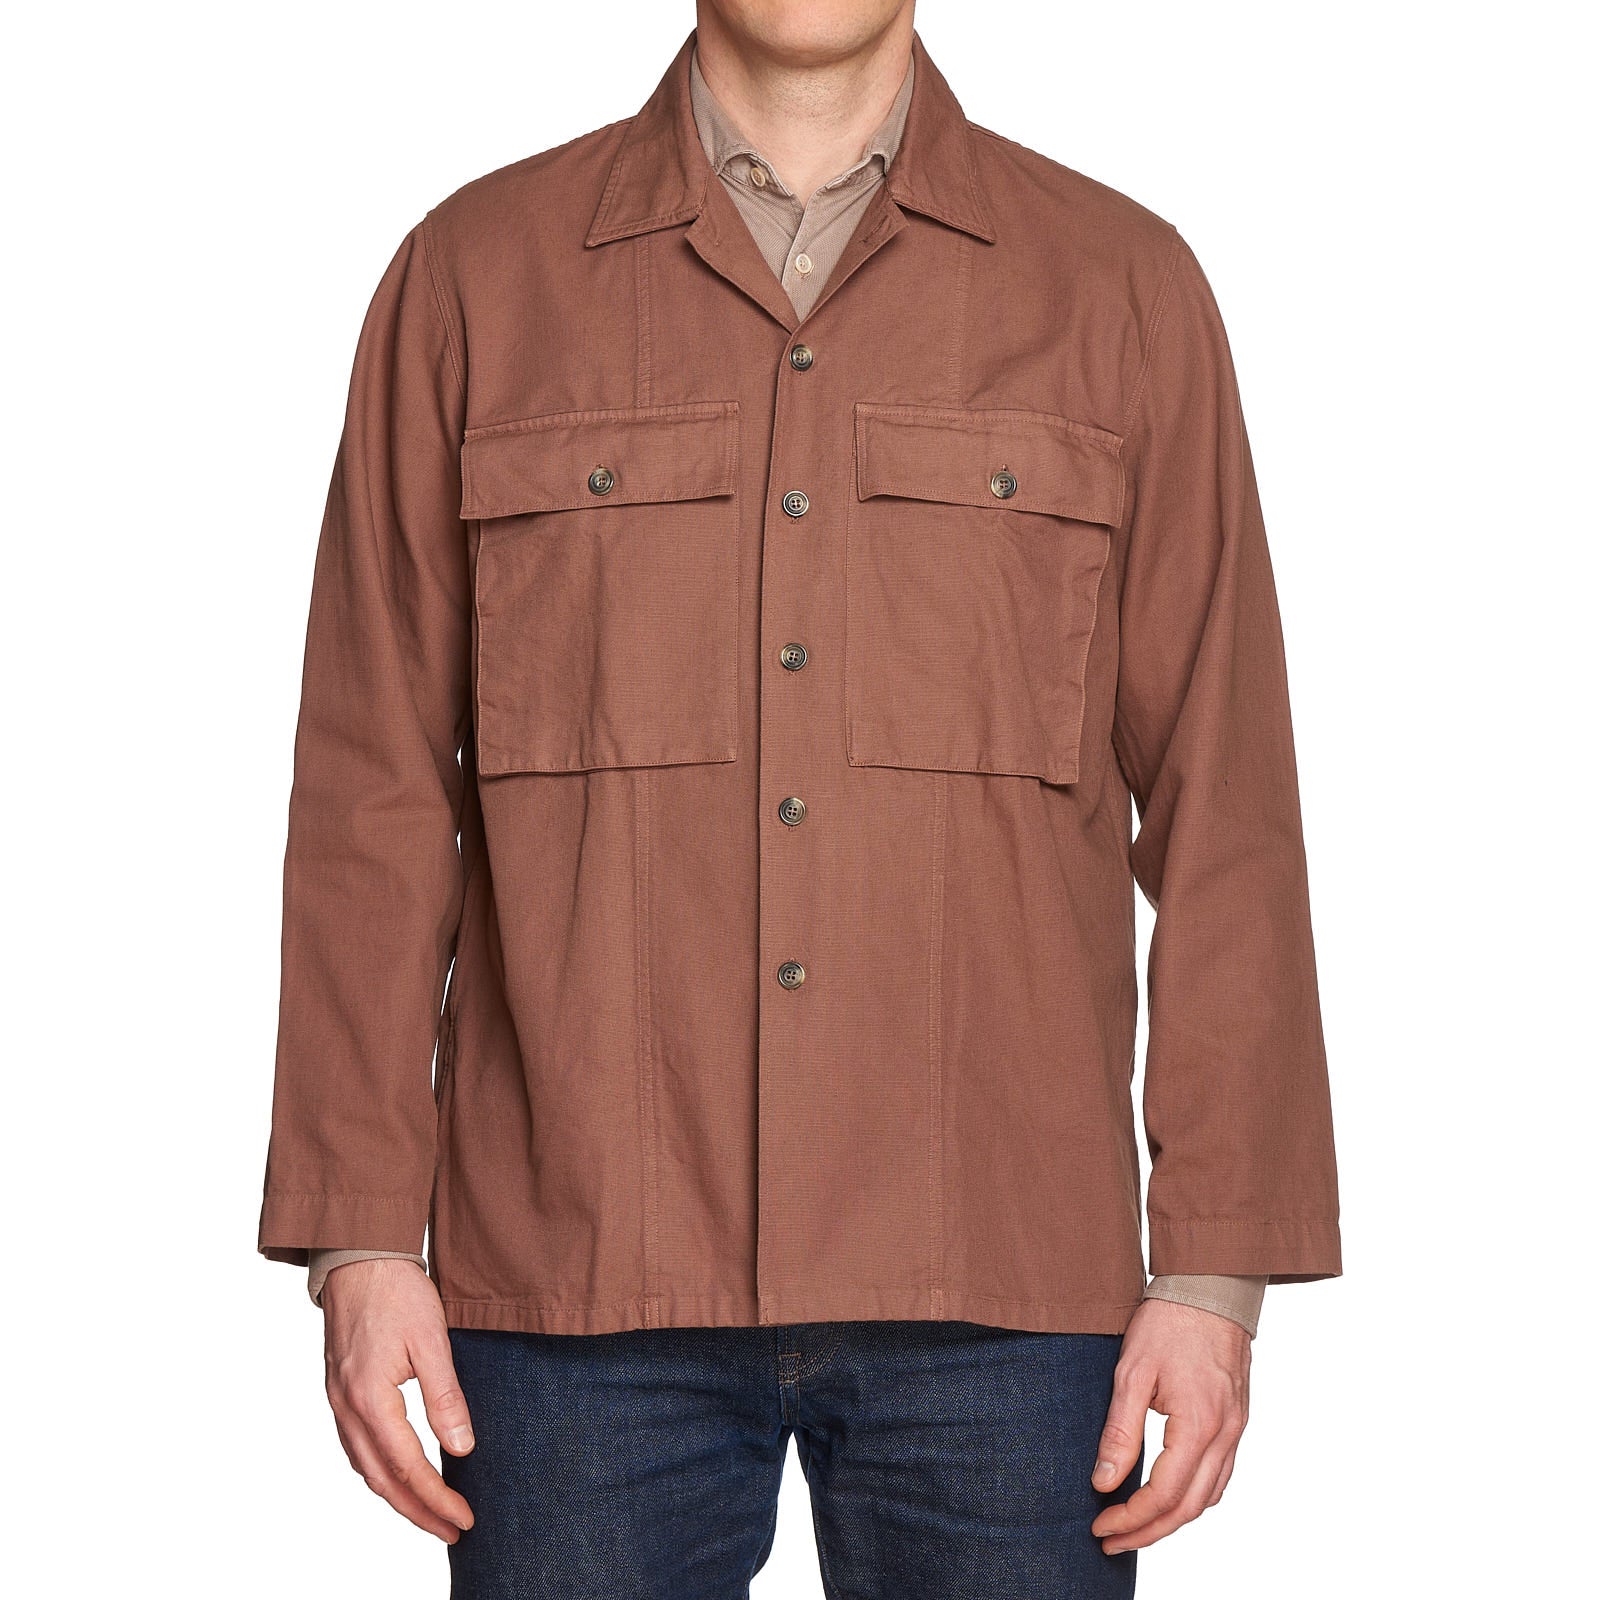 GUY ROVER X FORTELA "Pacific" Brown Cotton Casual Overshirt Shirt NEW Size L GUY ROVER X FORTELA